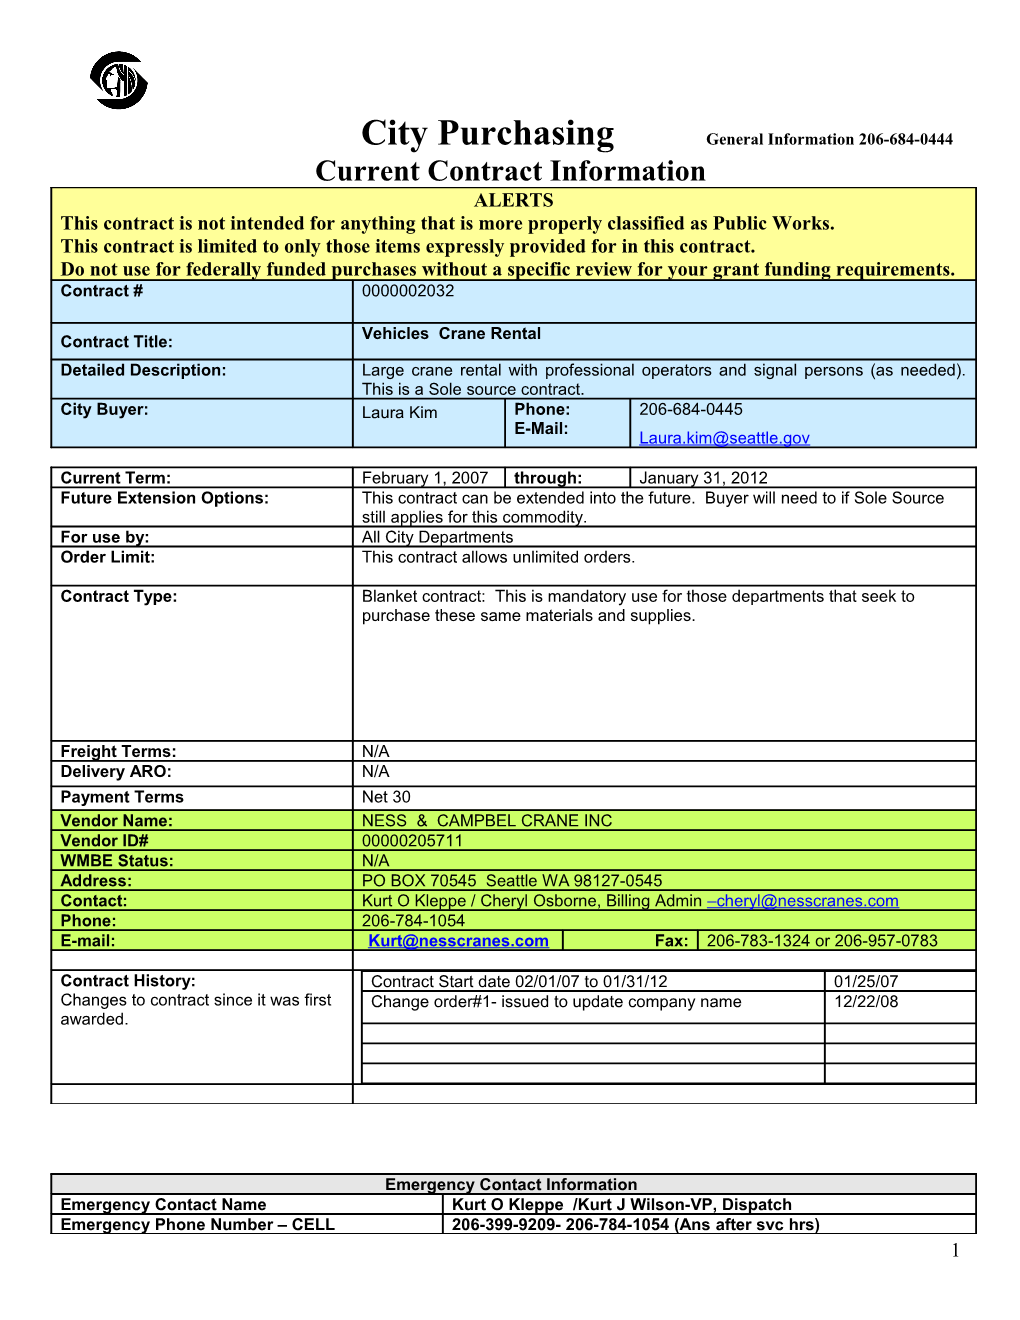 Current Contract Information Form s26